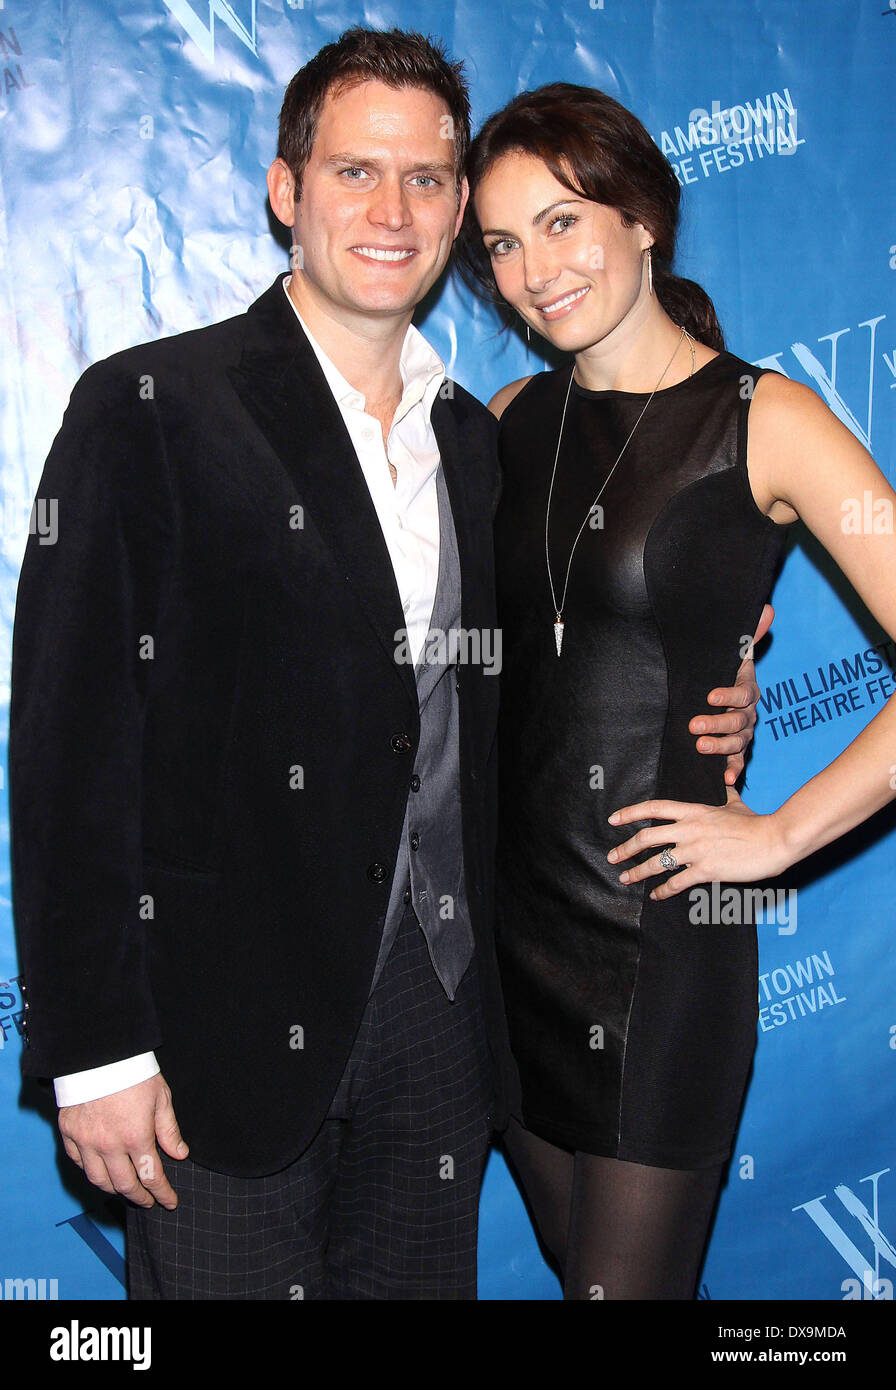 Steven Pasquale and Laura Benanti at the Williamstown Theatre Festival's 2012 Benefit, held at the Edison Ballroom - Arrivals F Stock Photo